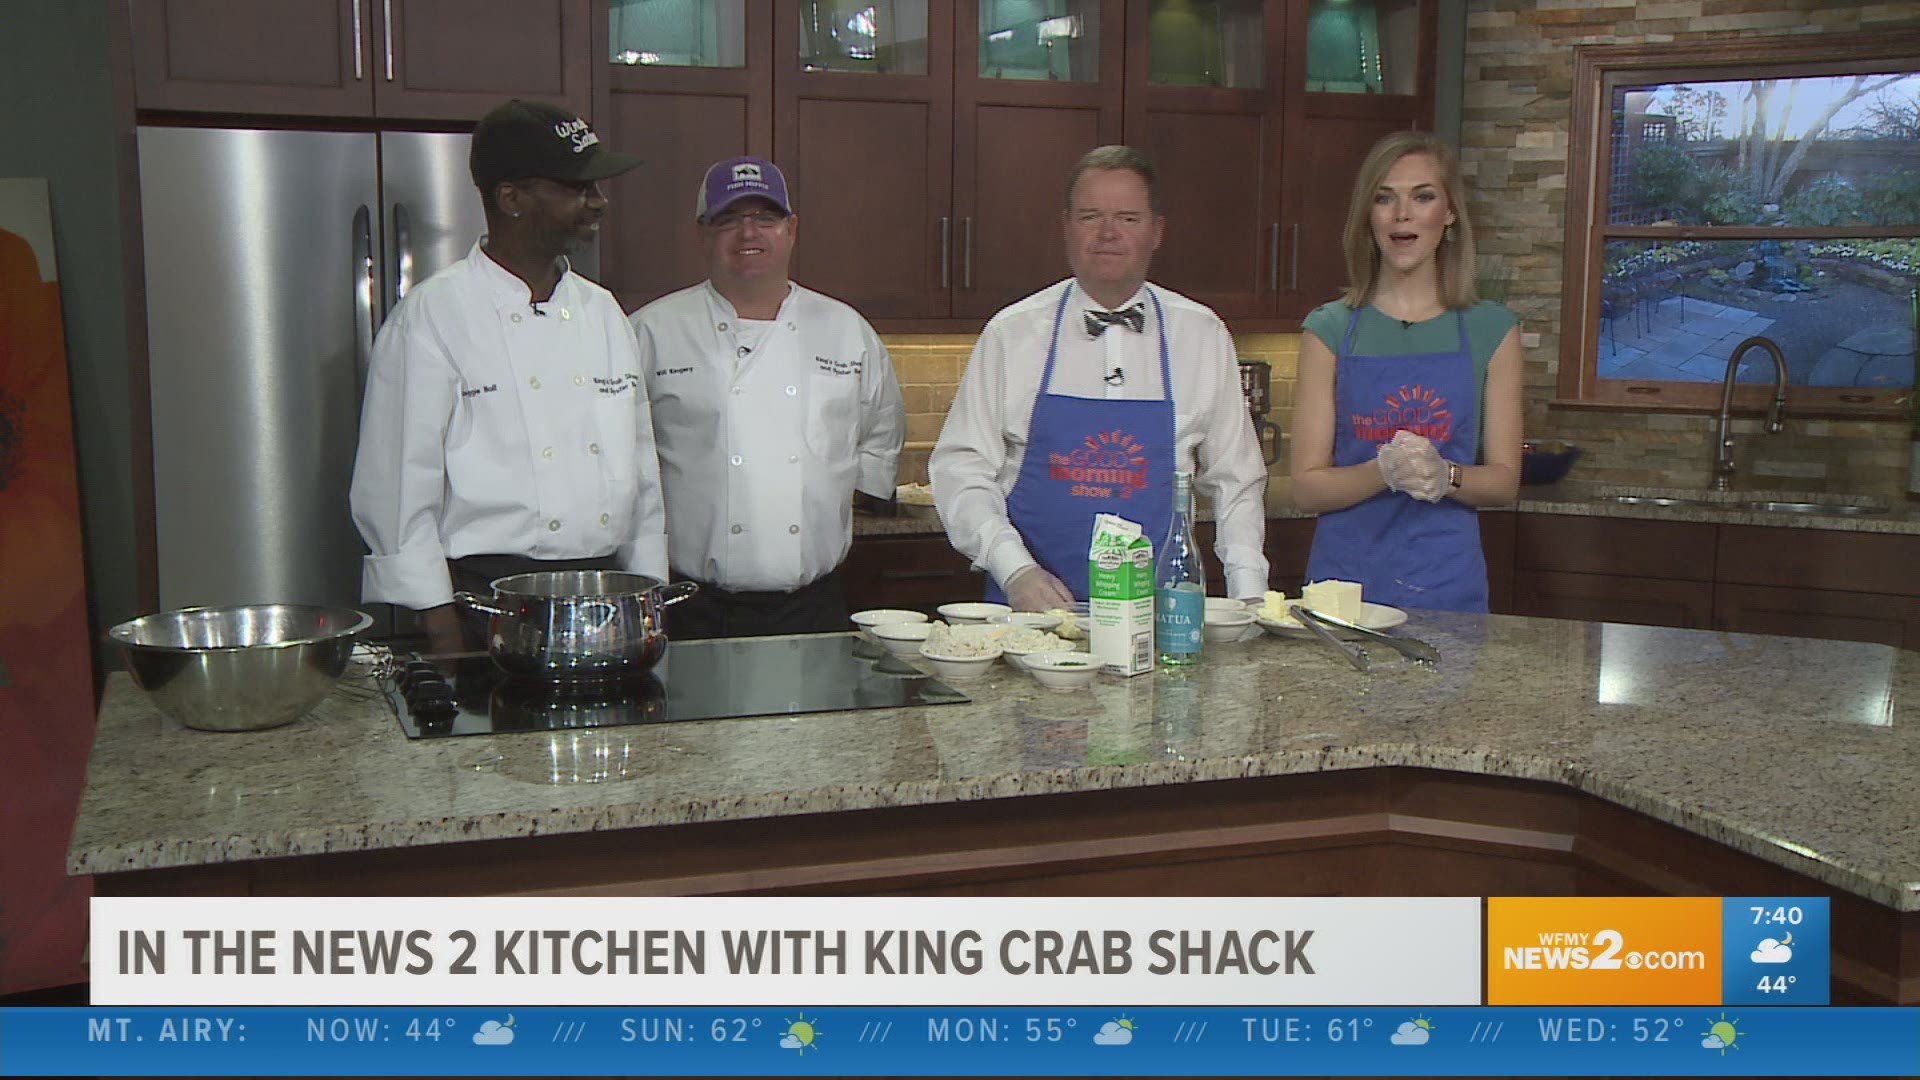 Located in Downtown Winston-Salem, King’s Crab Shack shares their recipes for Crab Dip and Risotto.